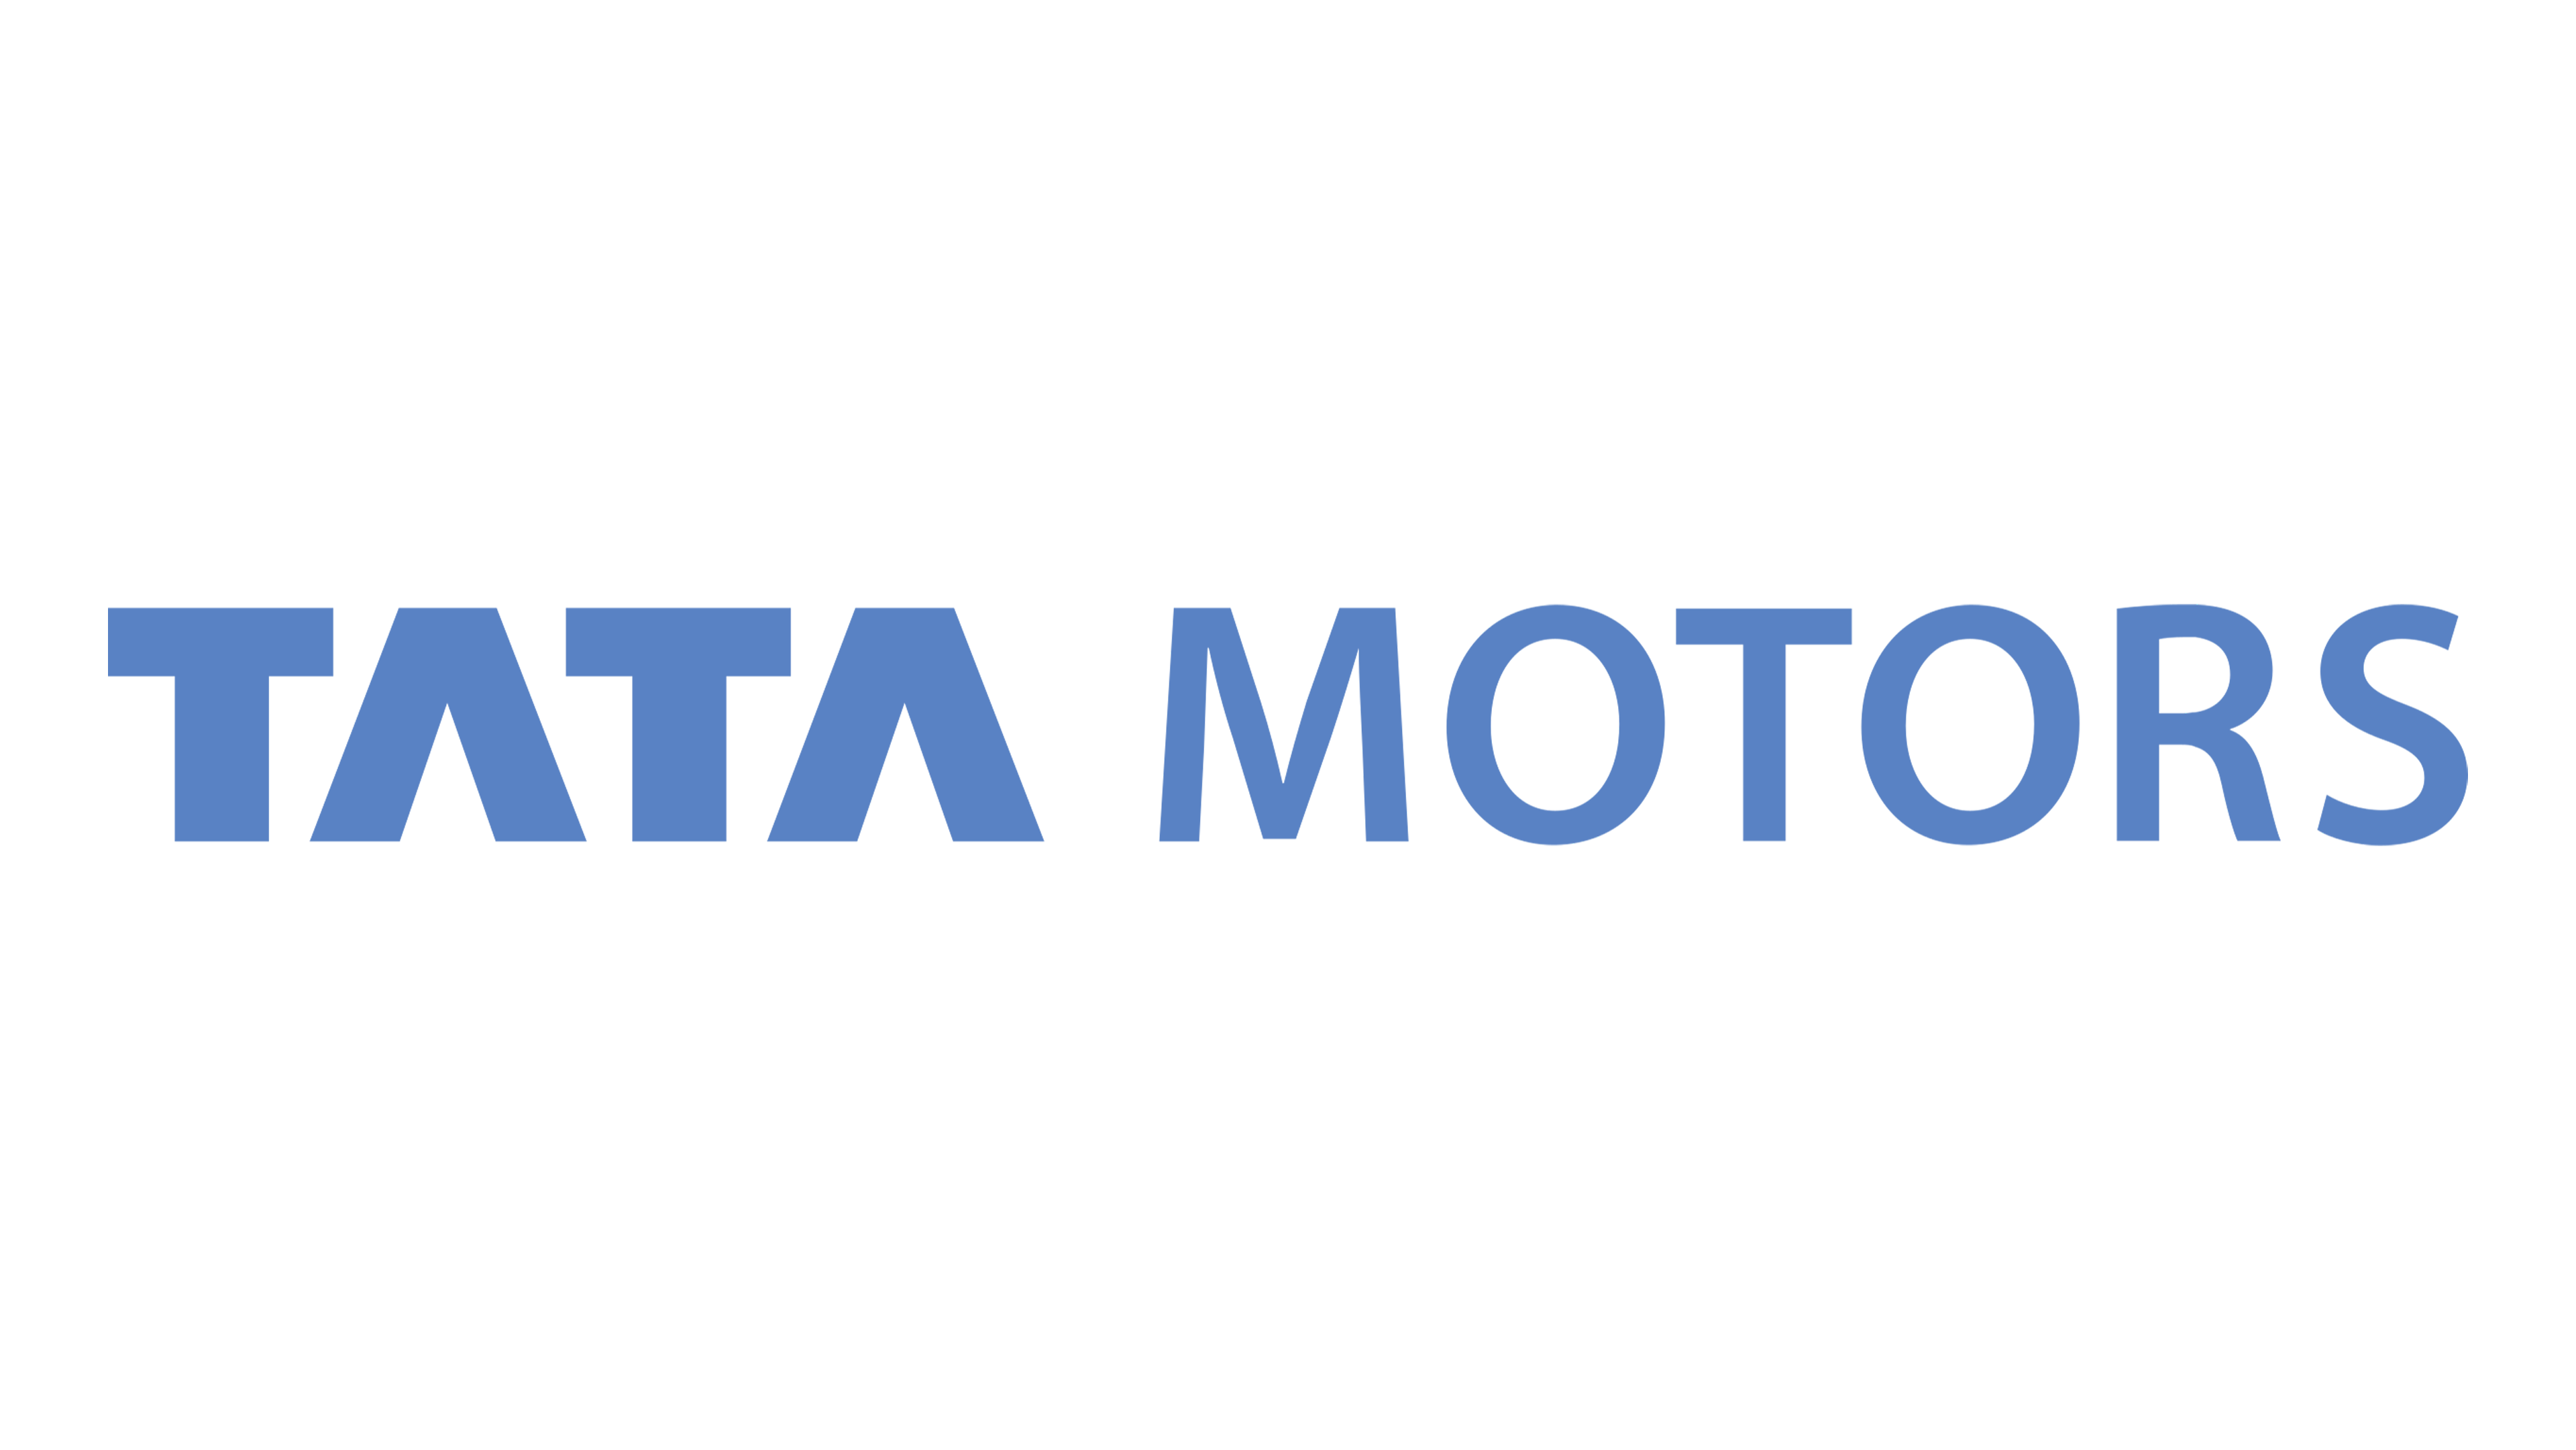 Tata Motors to hike passenger vehicle prices from Saturday | Business News  - The Indian Express